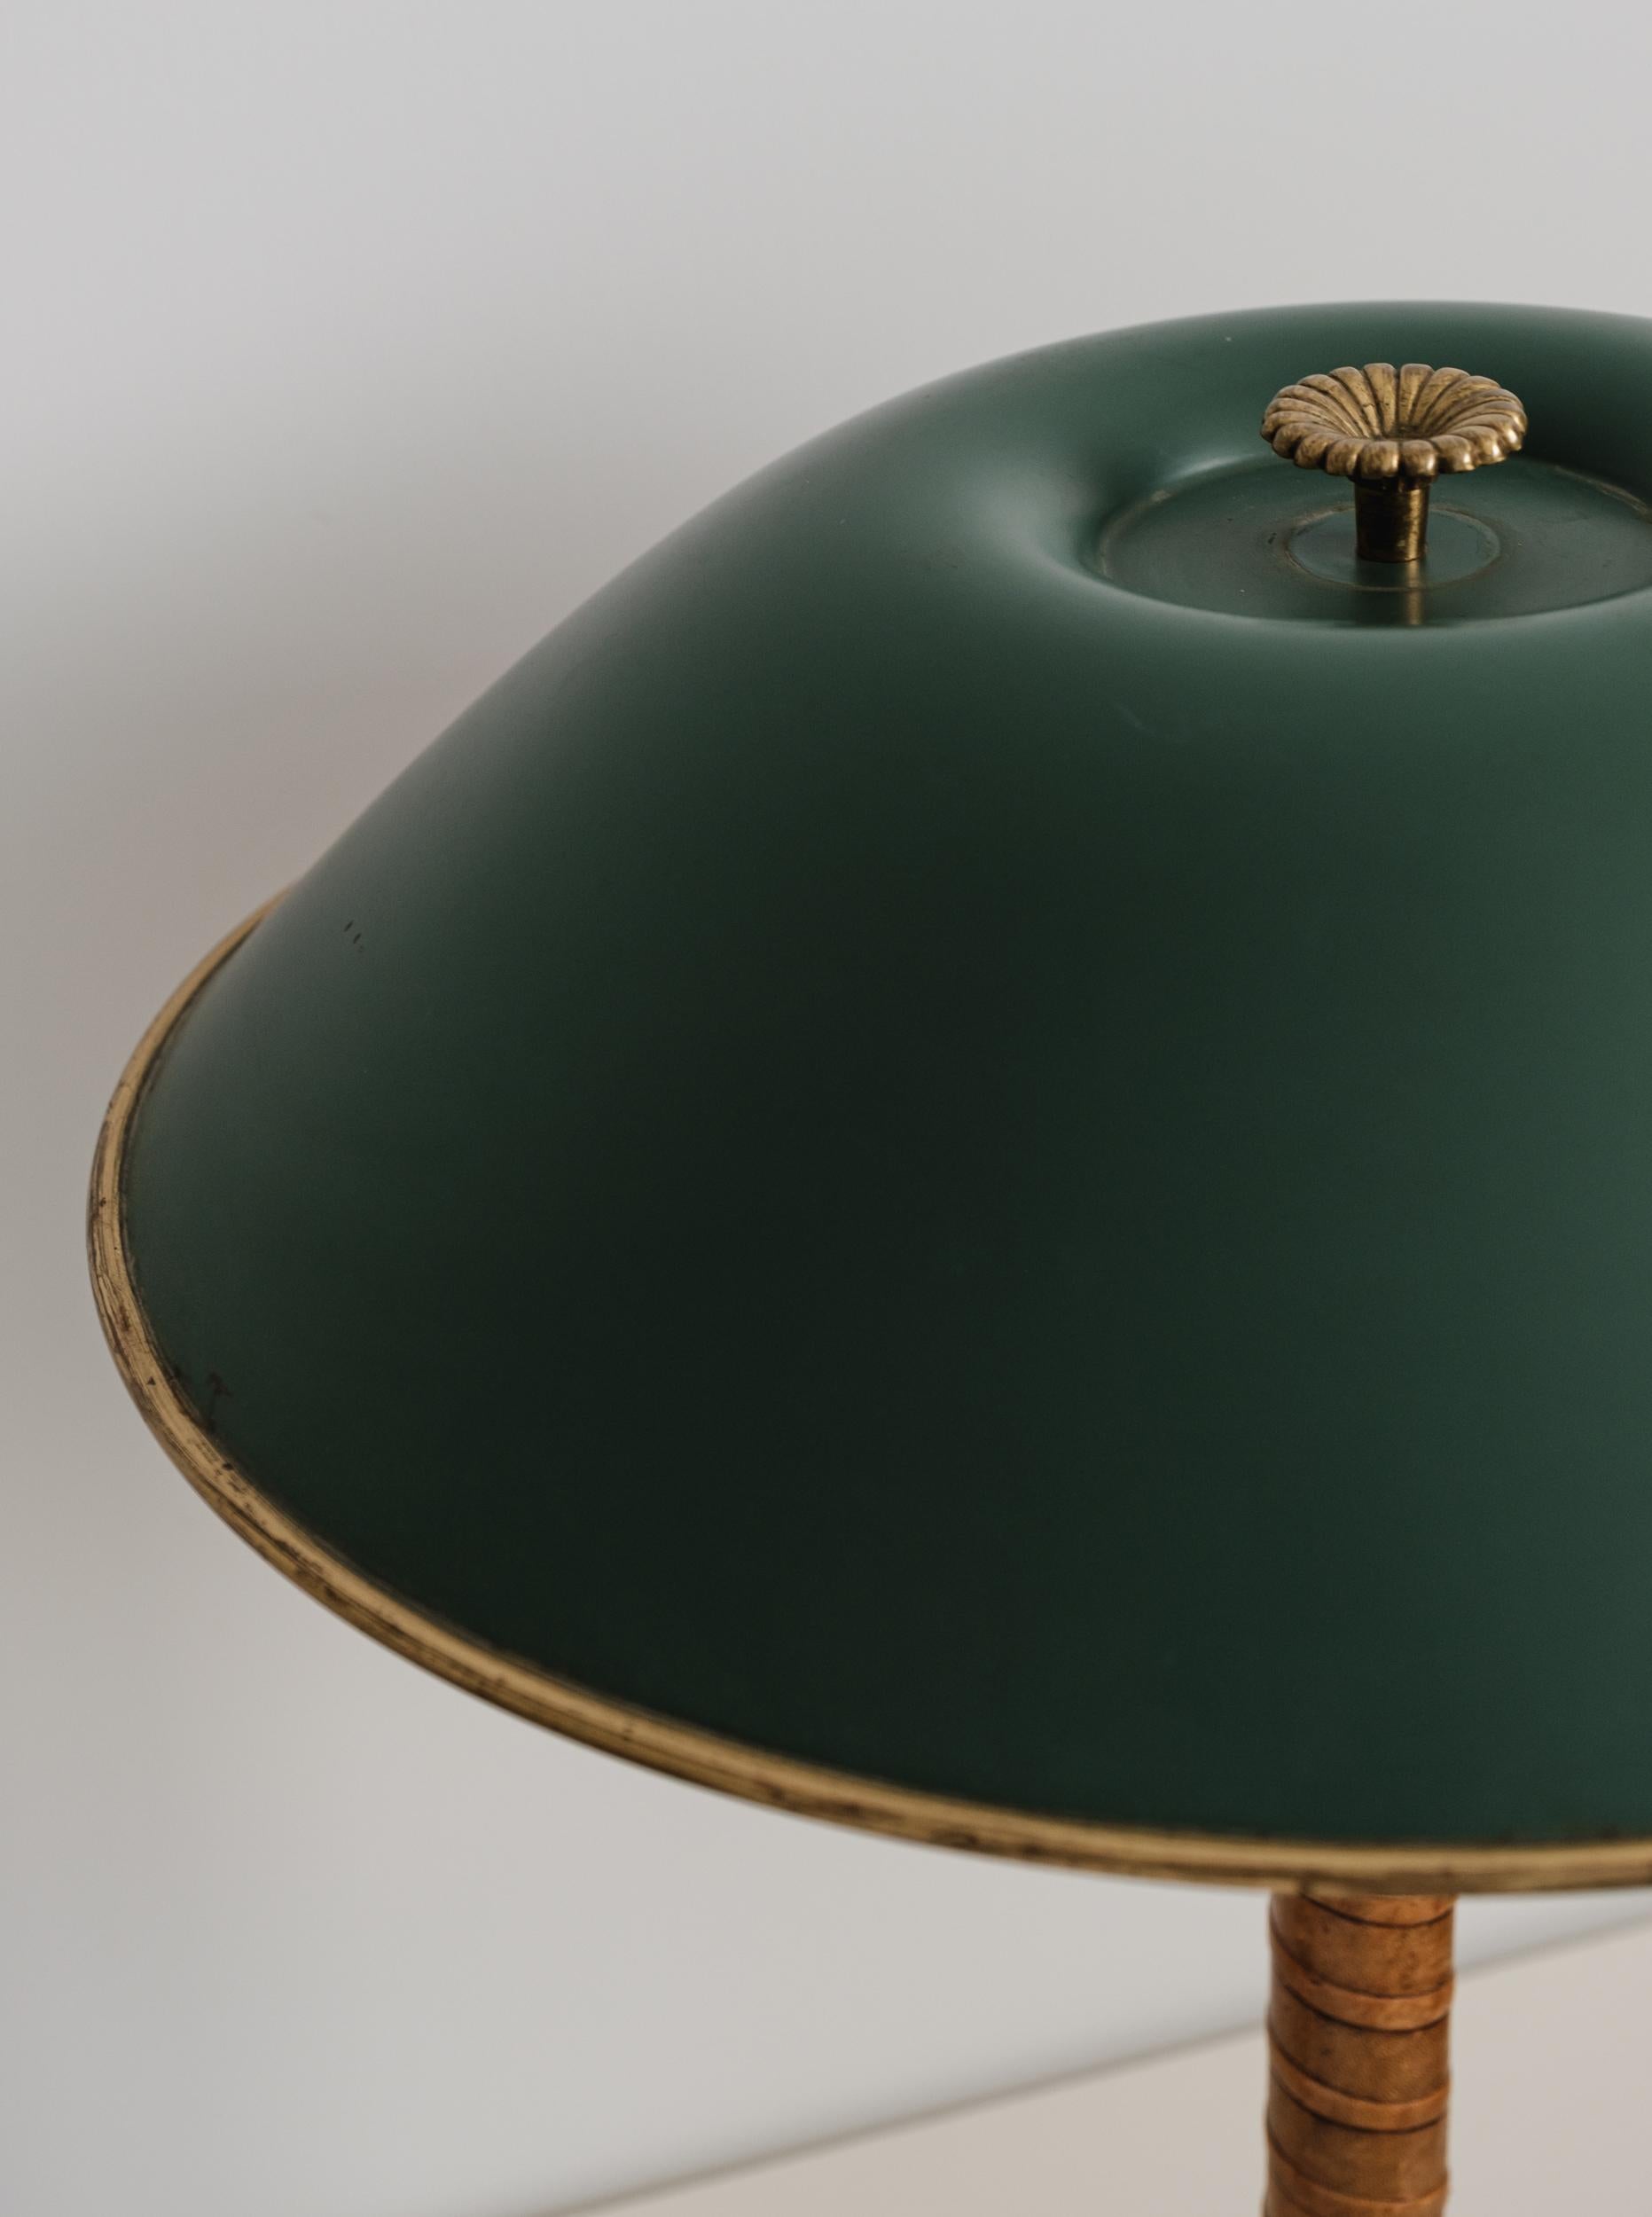 1940s Böhlmarks brass and leather table lamp. Produced by the iconic Swedish lamp maker circa 1940 and executed in green painted metal, brass and beautifully distressed but tight leather wrapping. Reminiscent of the early designs of Paavo Tynell for